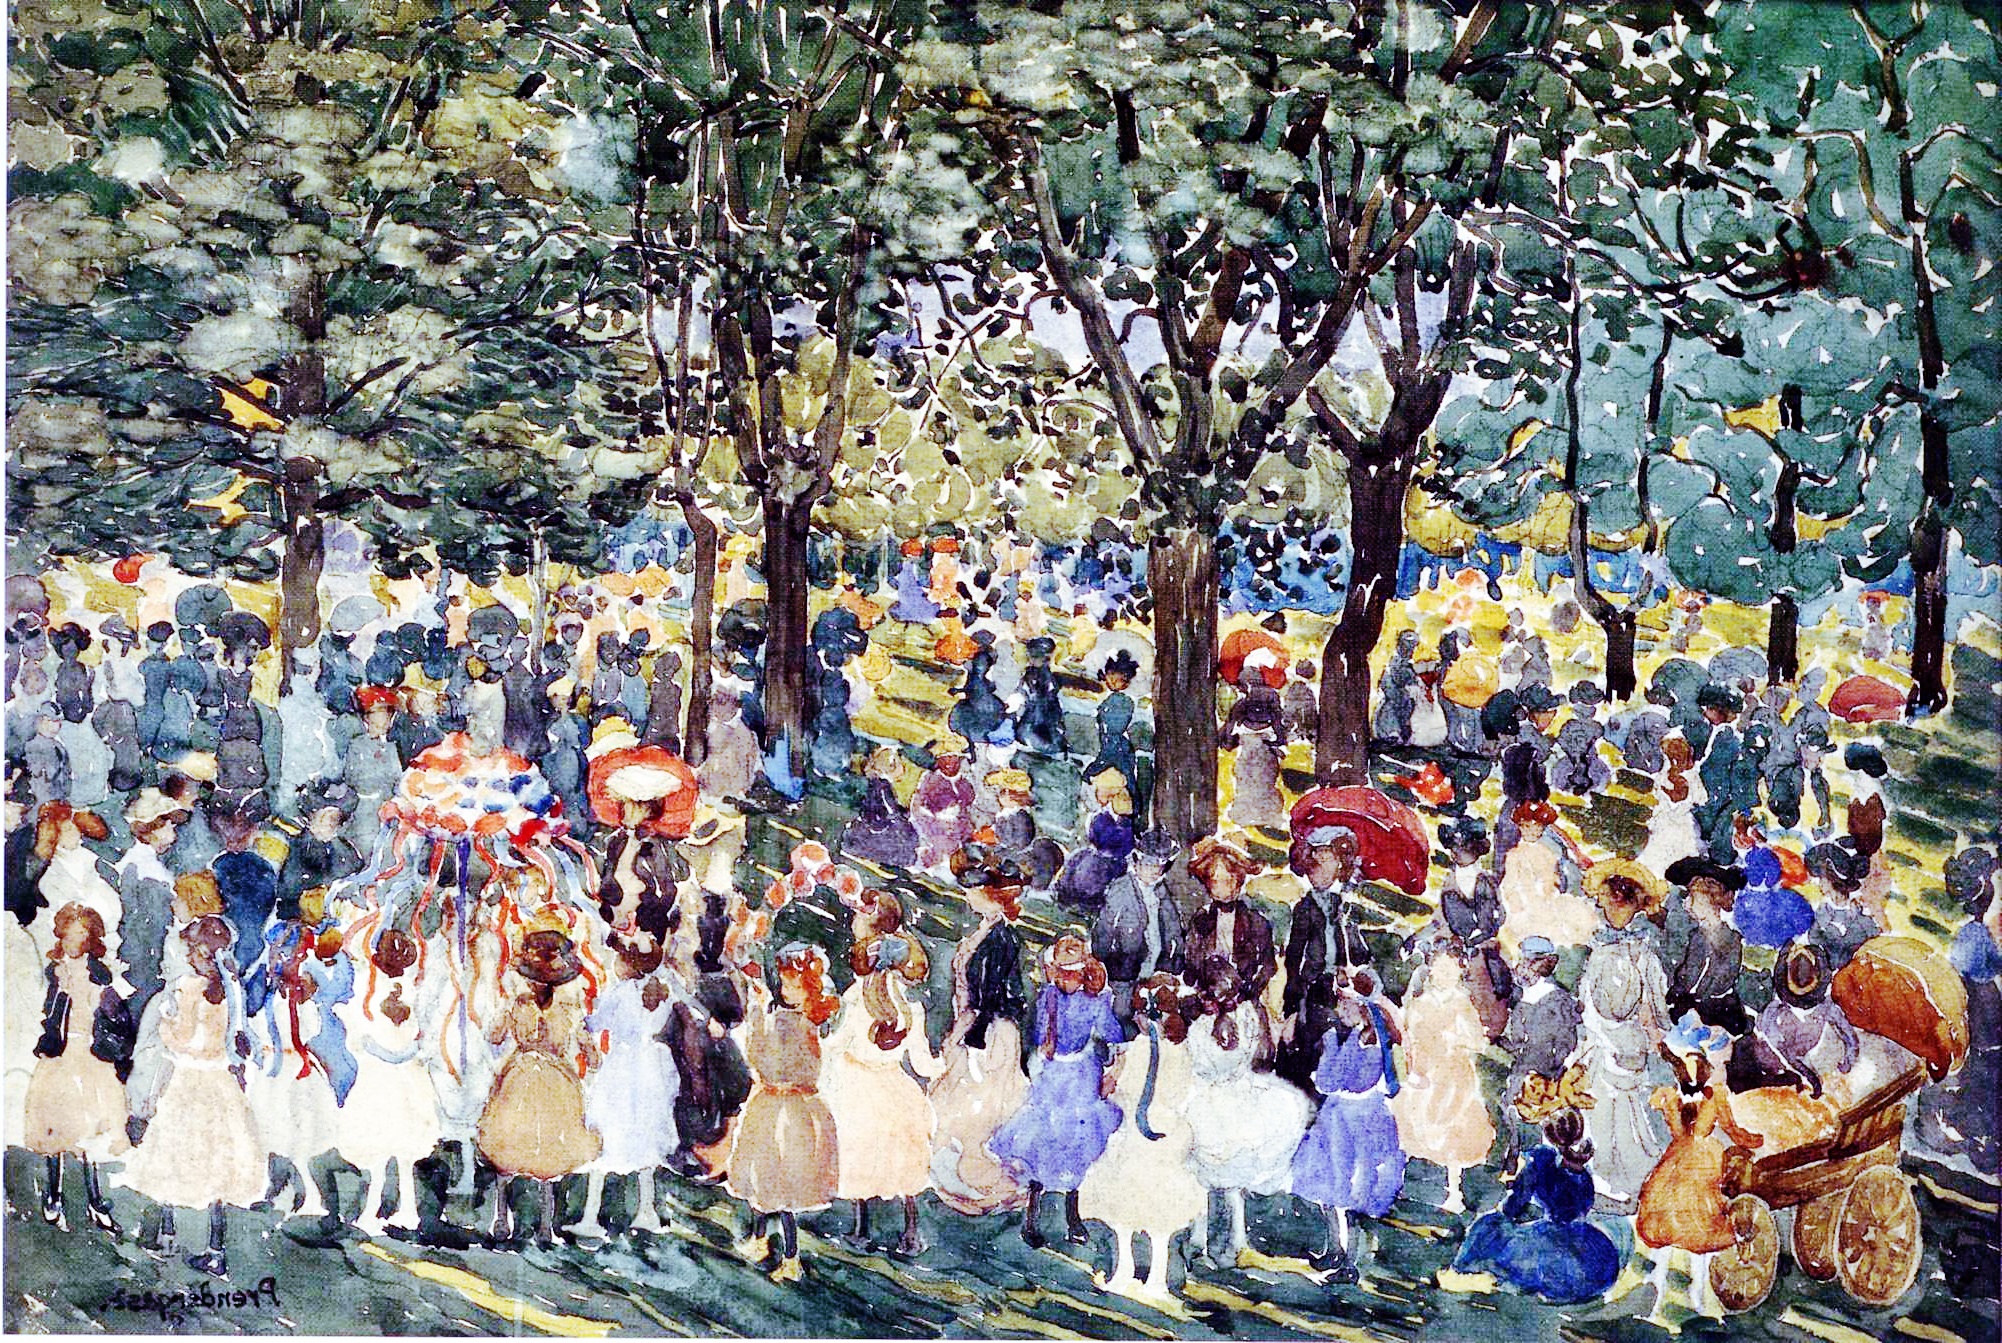 a Isolde Pendleton painting of people in a park